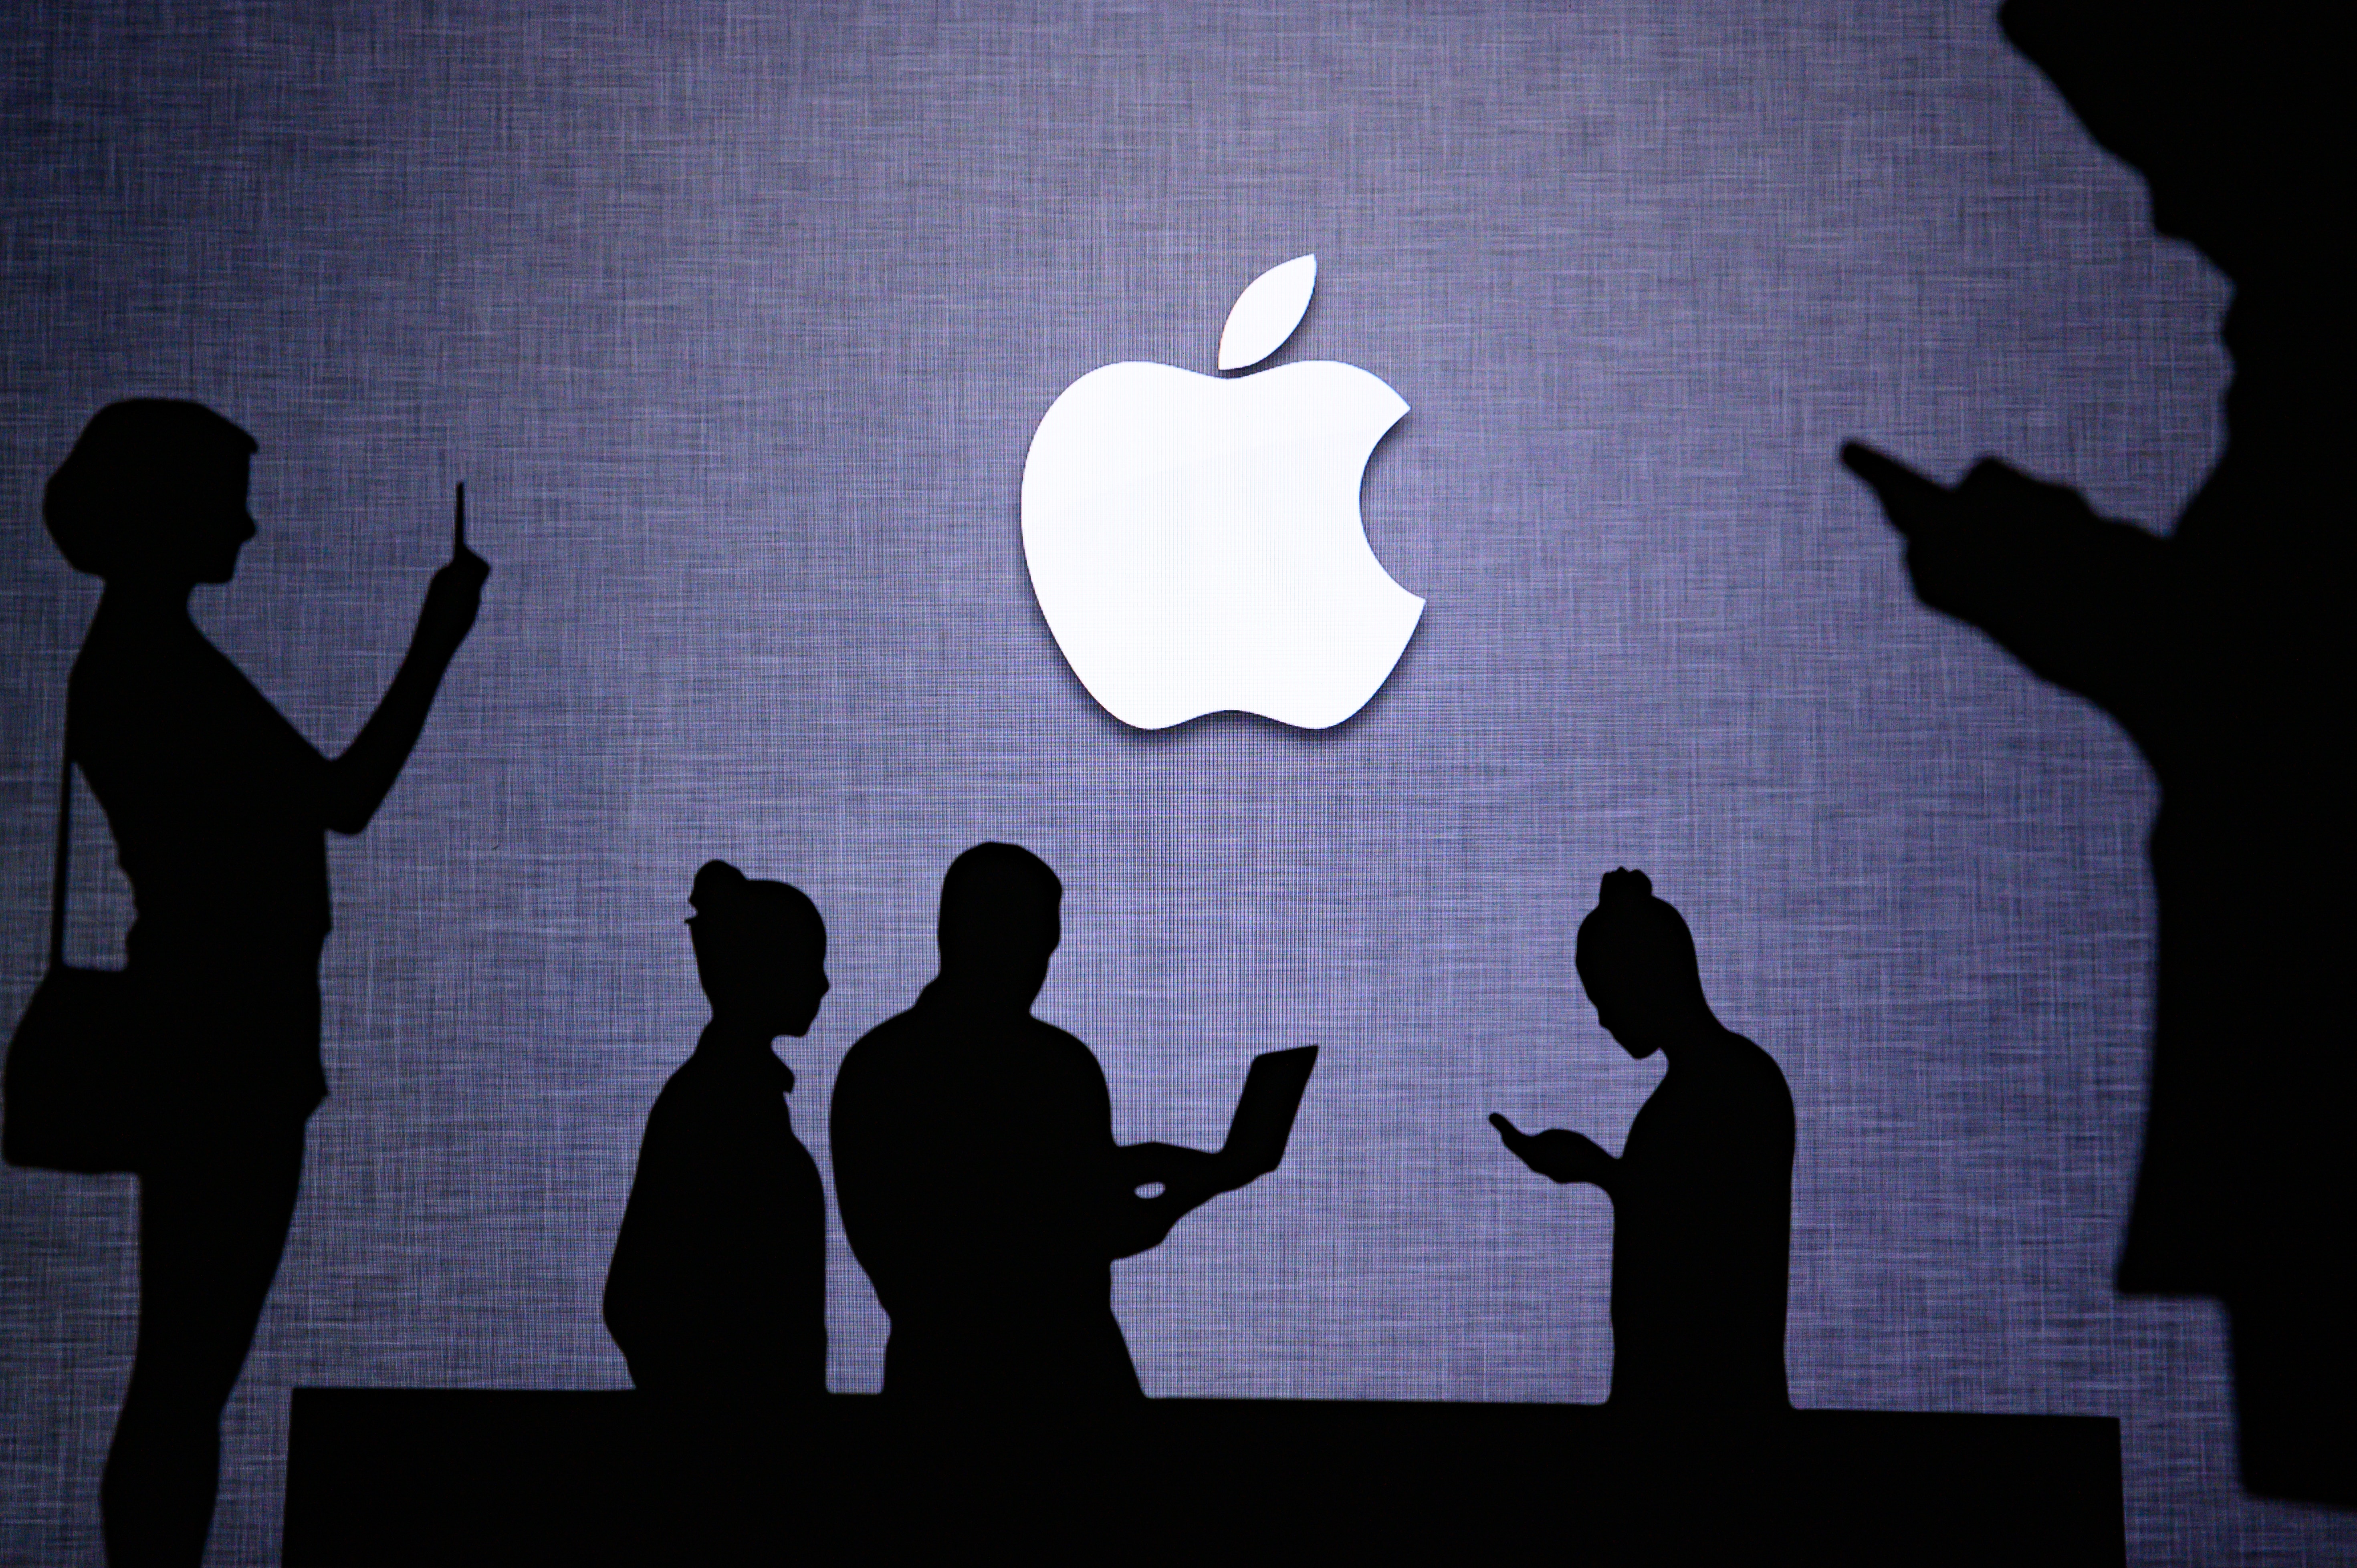 Apple In Focus After Credit Suisse Upgrades Stock And Lifts Price Target By 21%